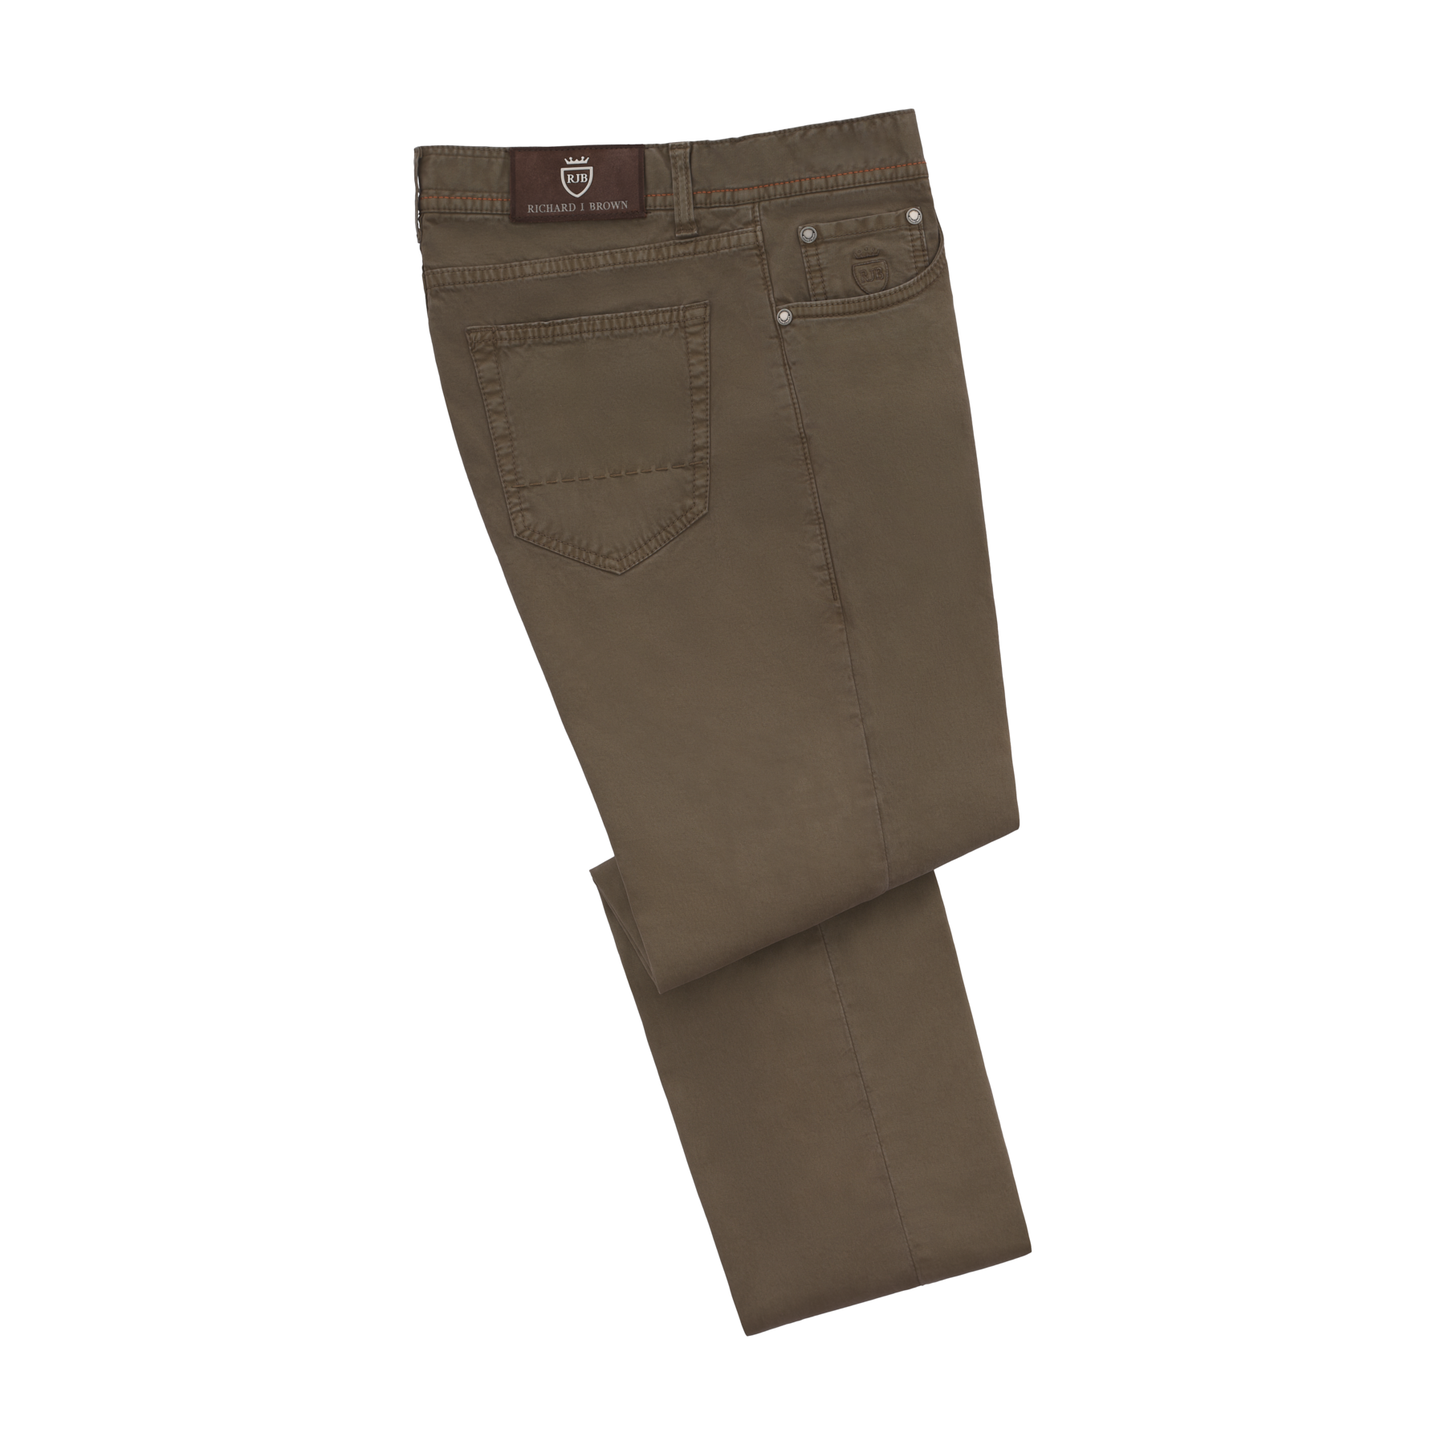 Slim-Fit Stretch-Cotton 5 Pocket Trousers in Khaki